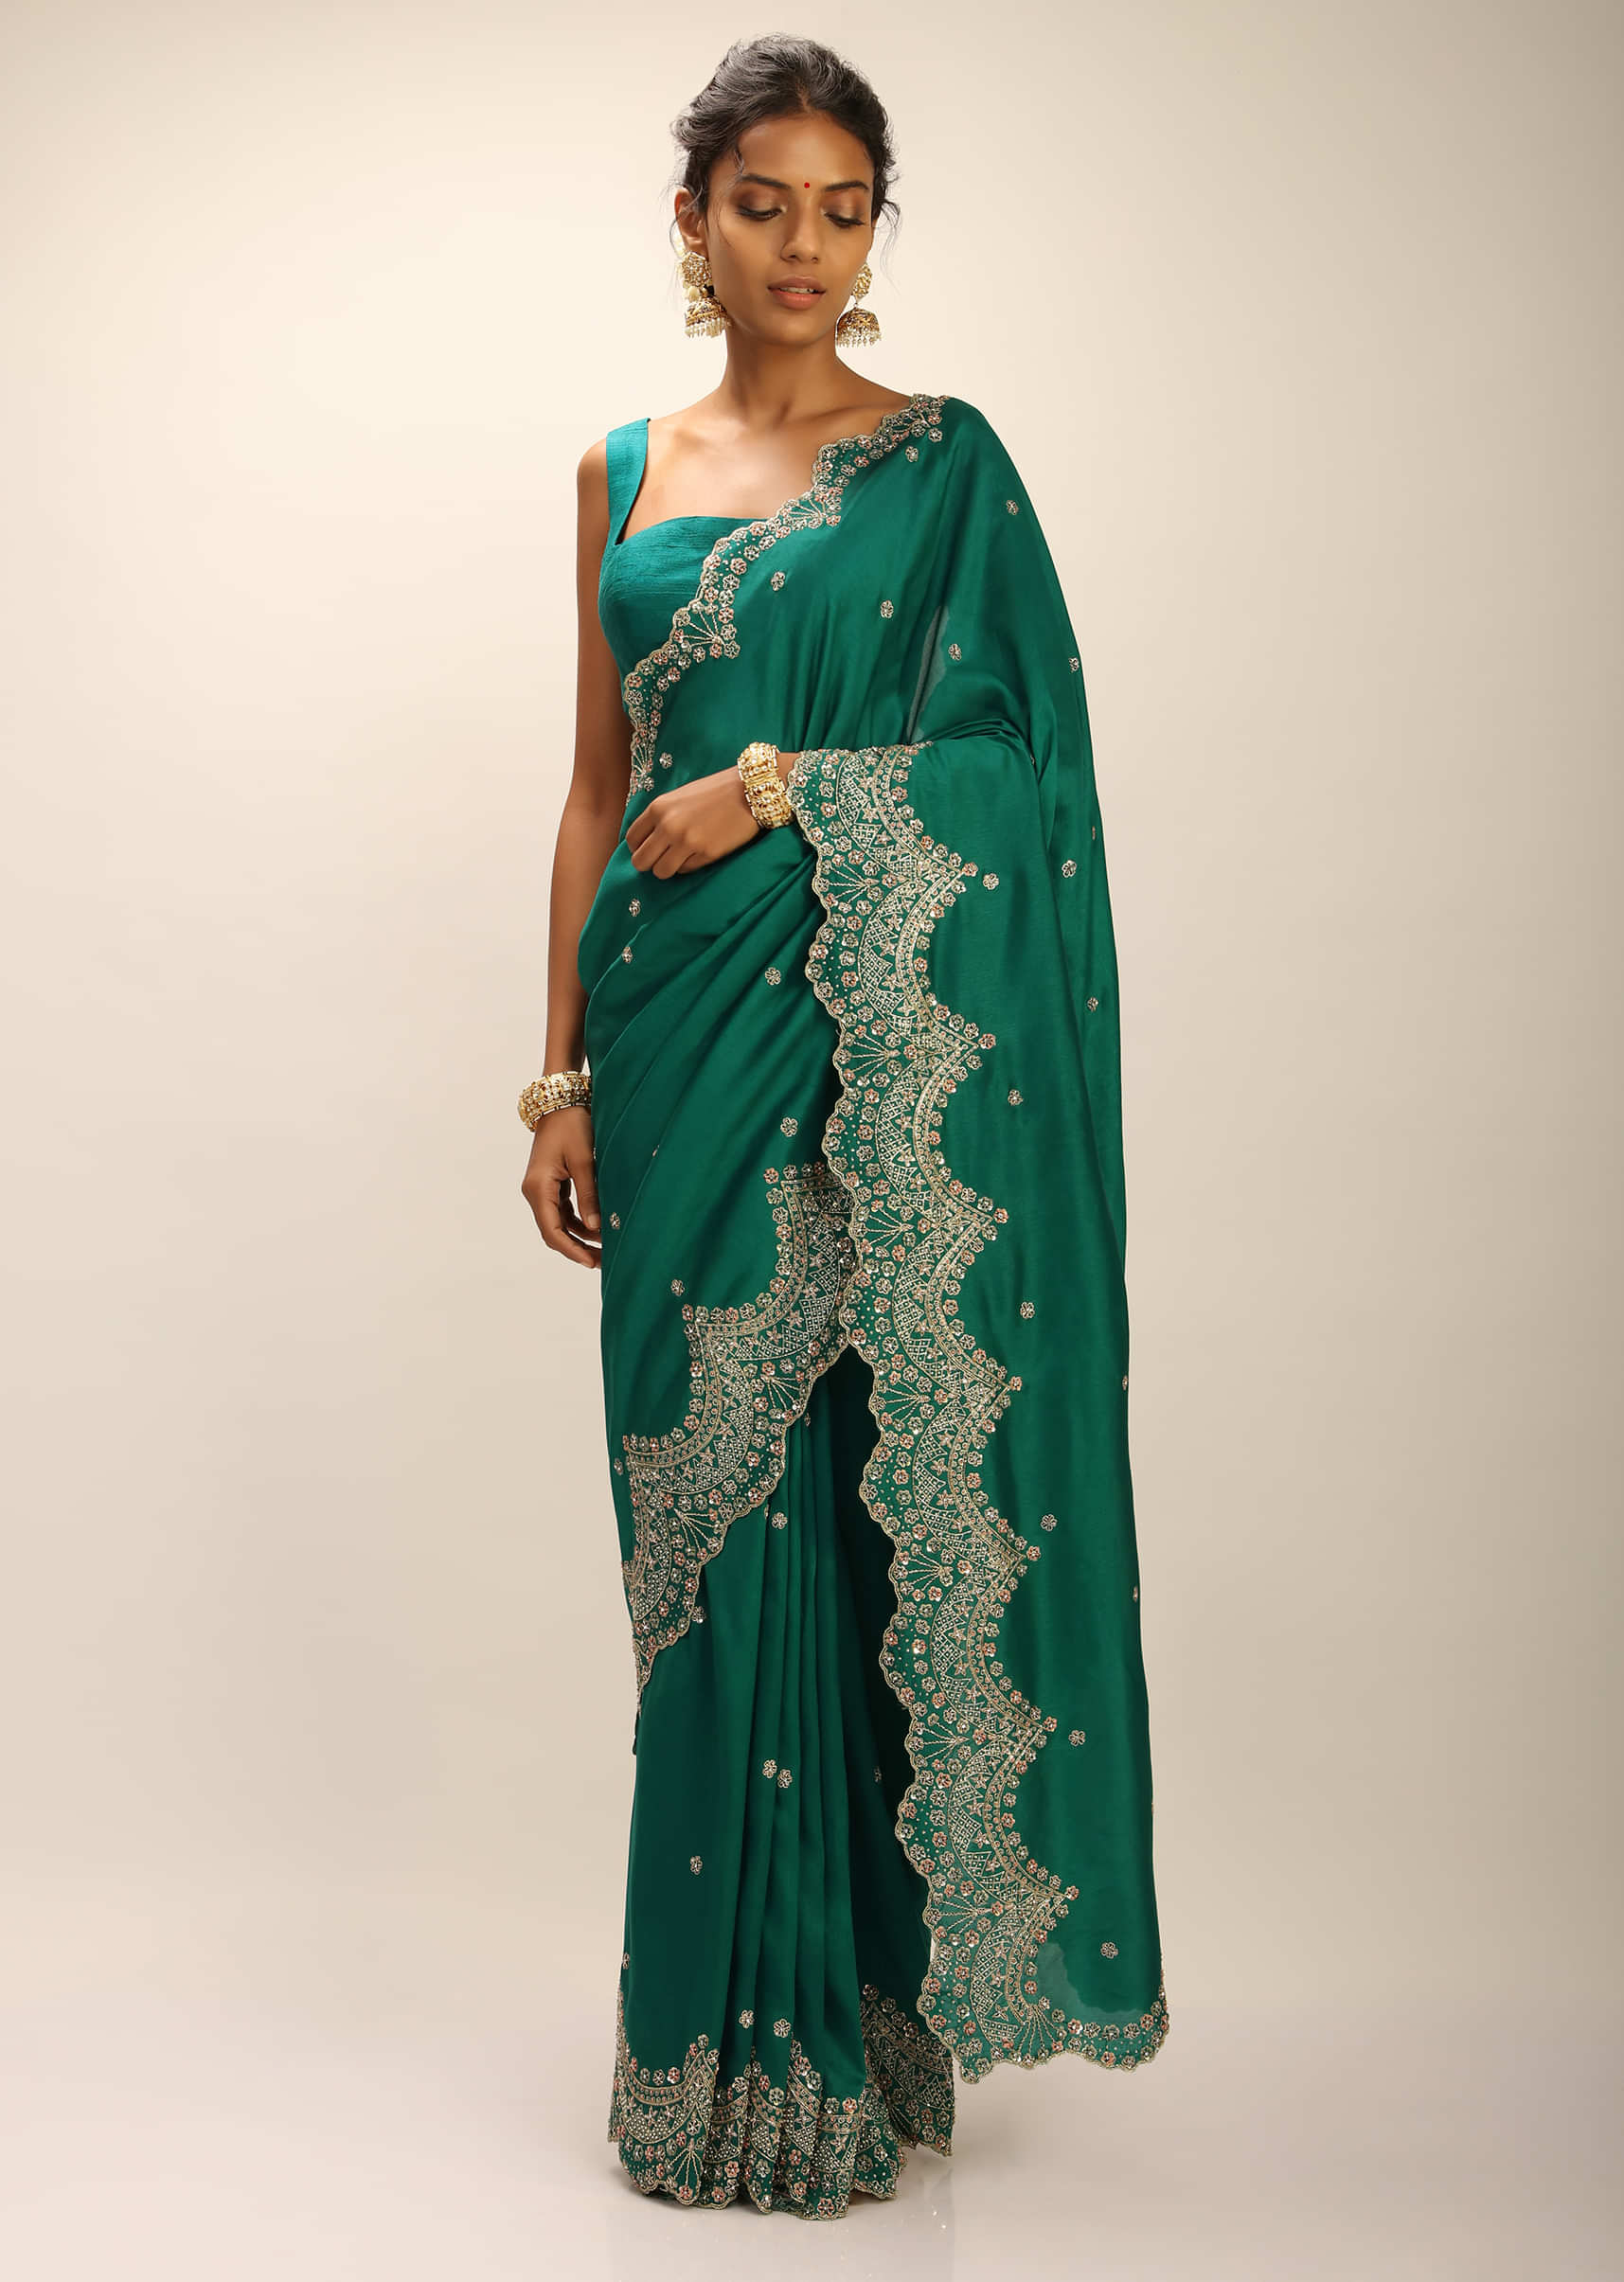 Teal Green Saree In Dupion Silk With Hand Embroidered Scallop Cut Border With Thread And Sequins Flowers  